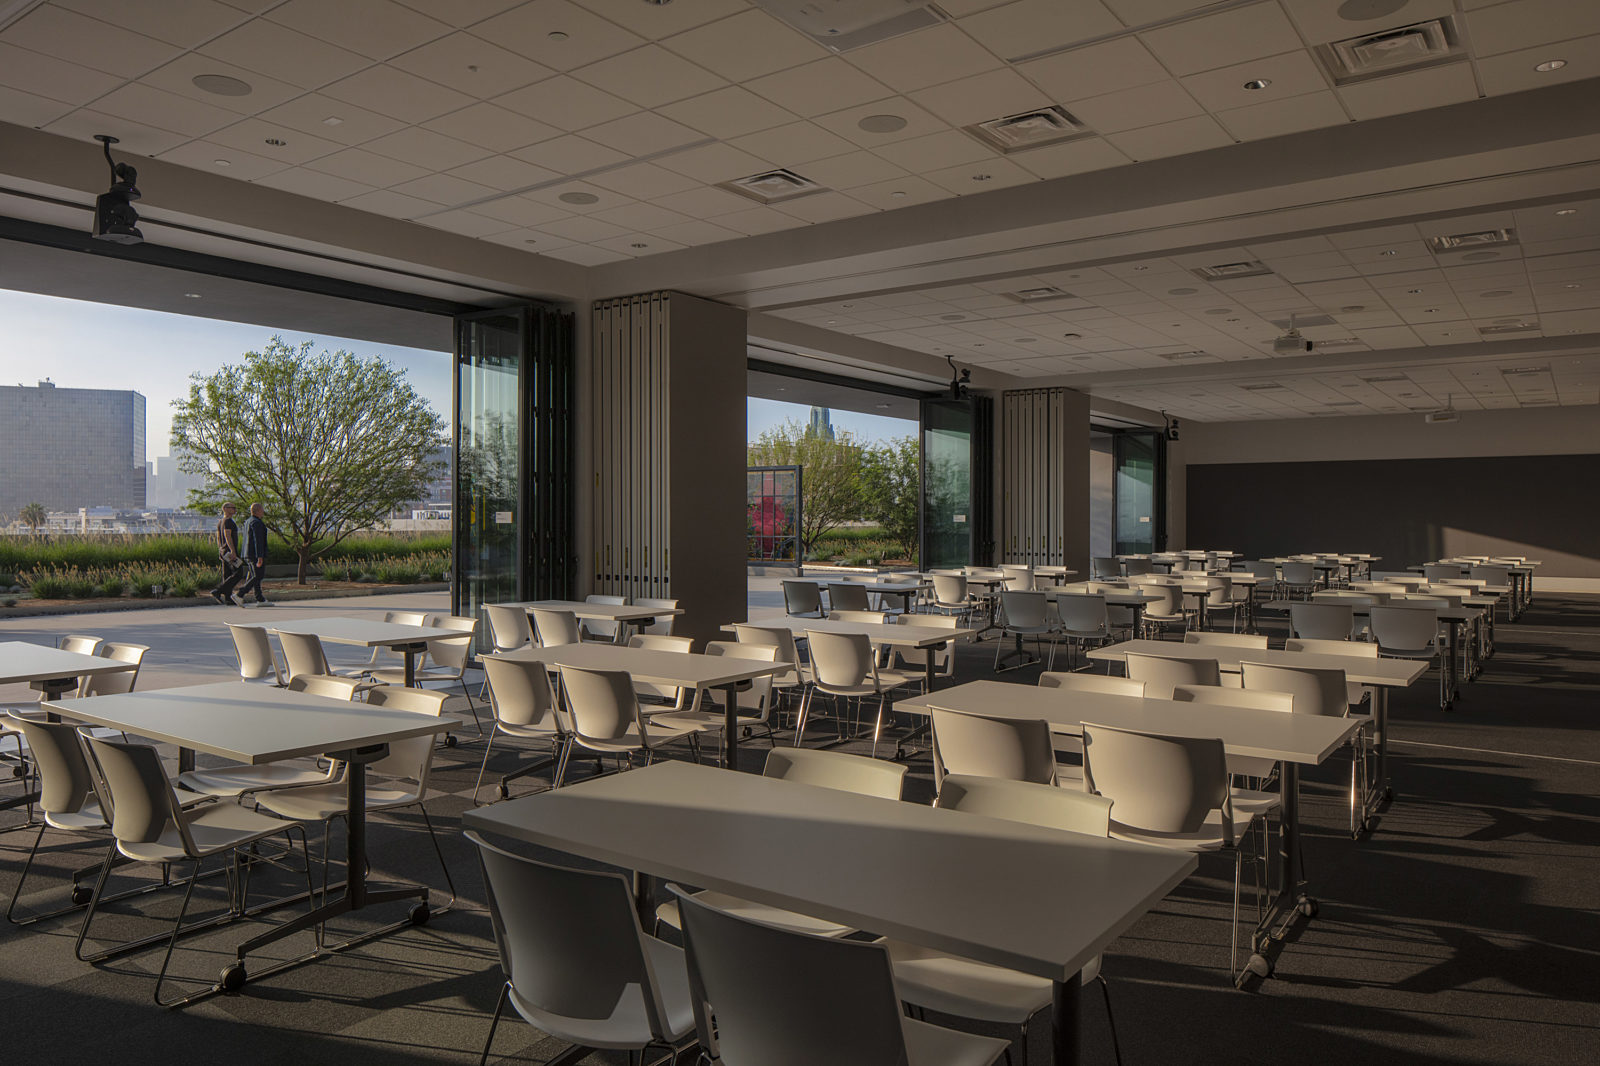 A spacious meeting room with stackable seating and tables, located beside an open walkway with outdoor views, perfect for modern interior design.